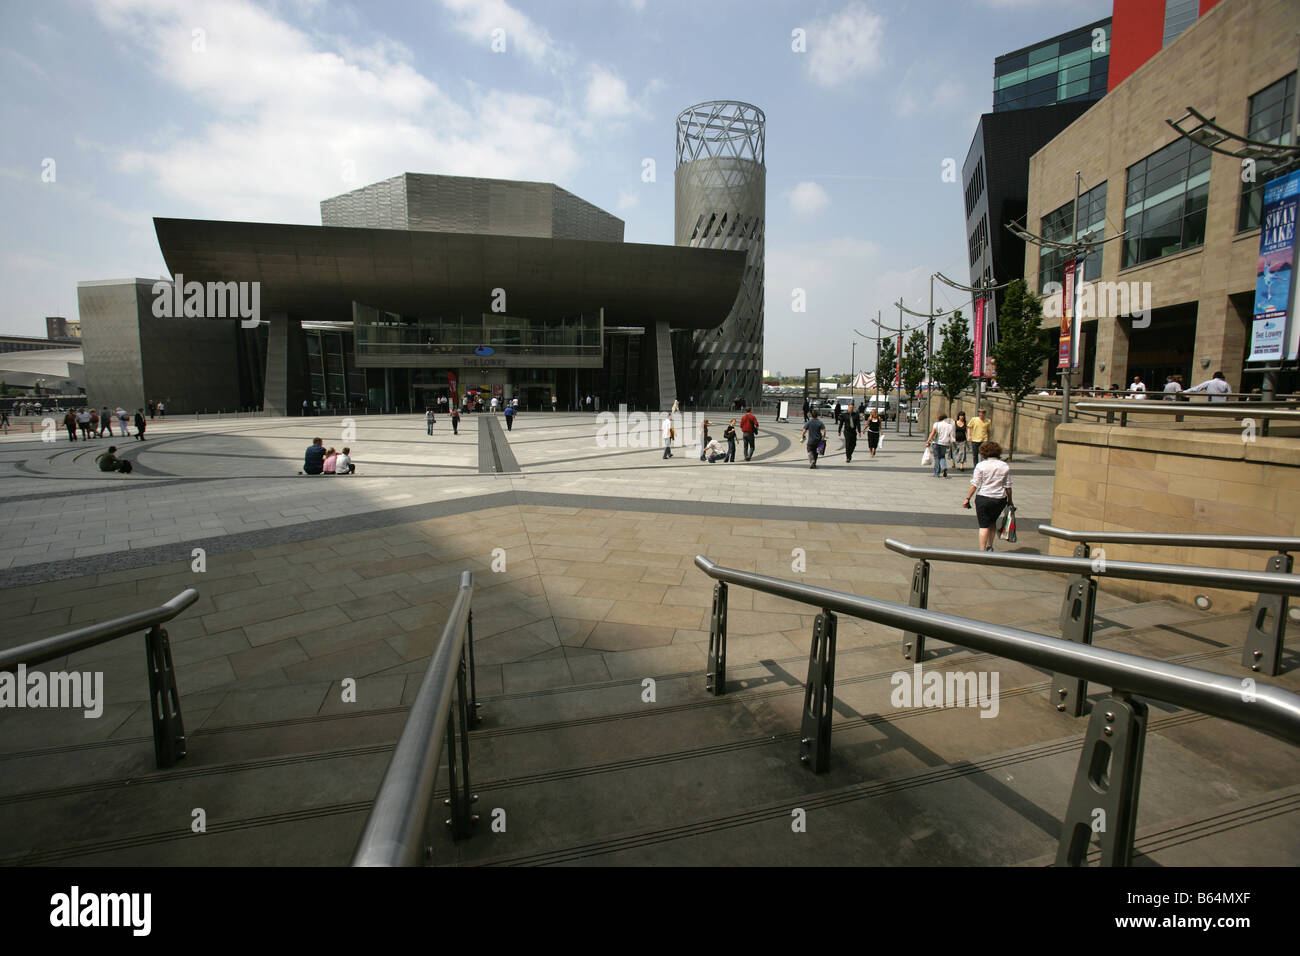 City of Salford, England. Main entrance to the Michael Wilford designed Lowry theatre and art complex in Salford Quays. Stock Photo